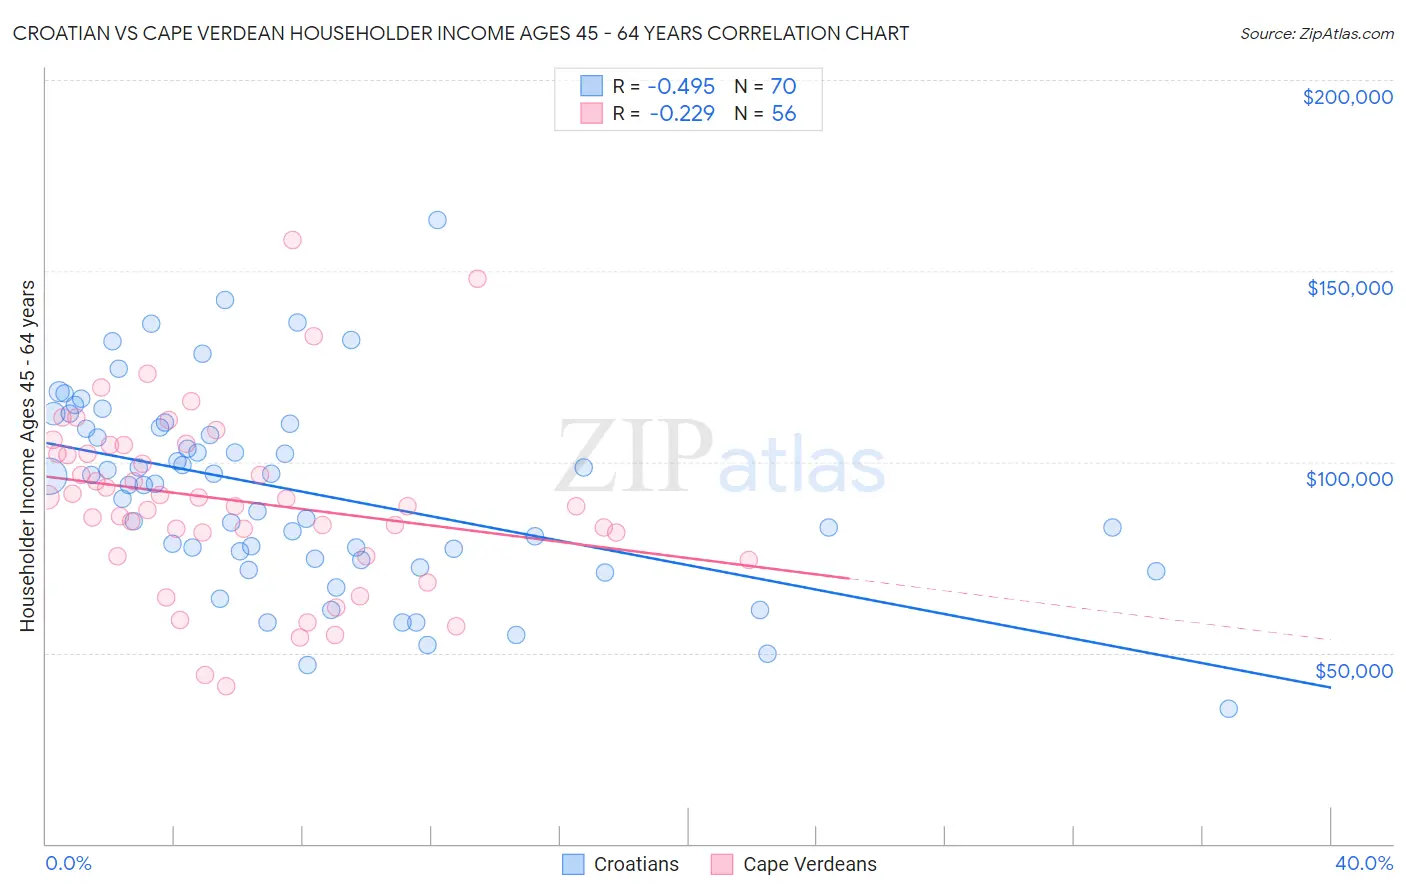 Croatian vs Cape Verdean Householder Income Ages 45 - 64 years